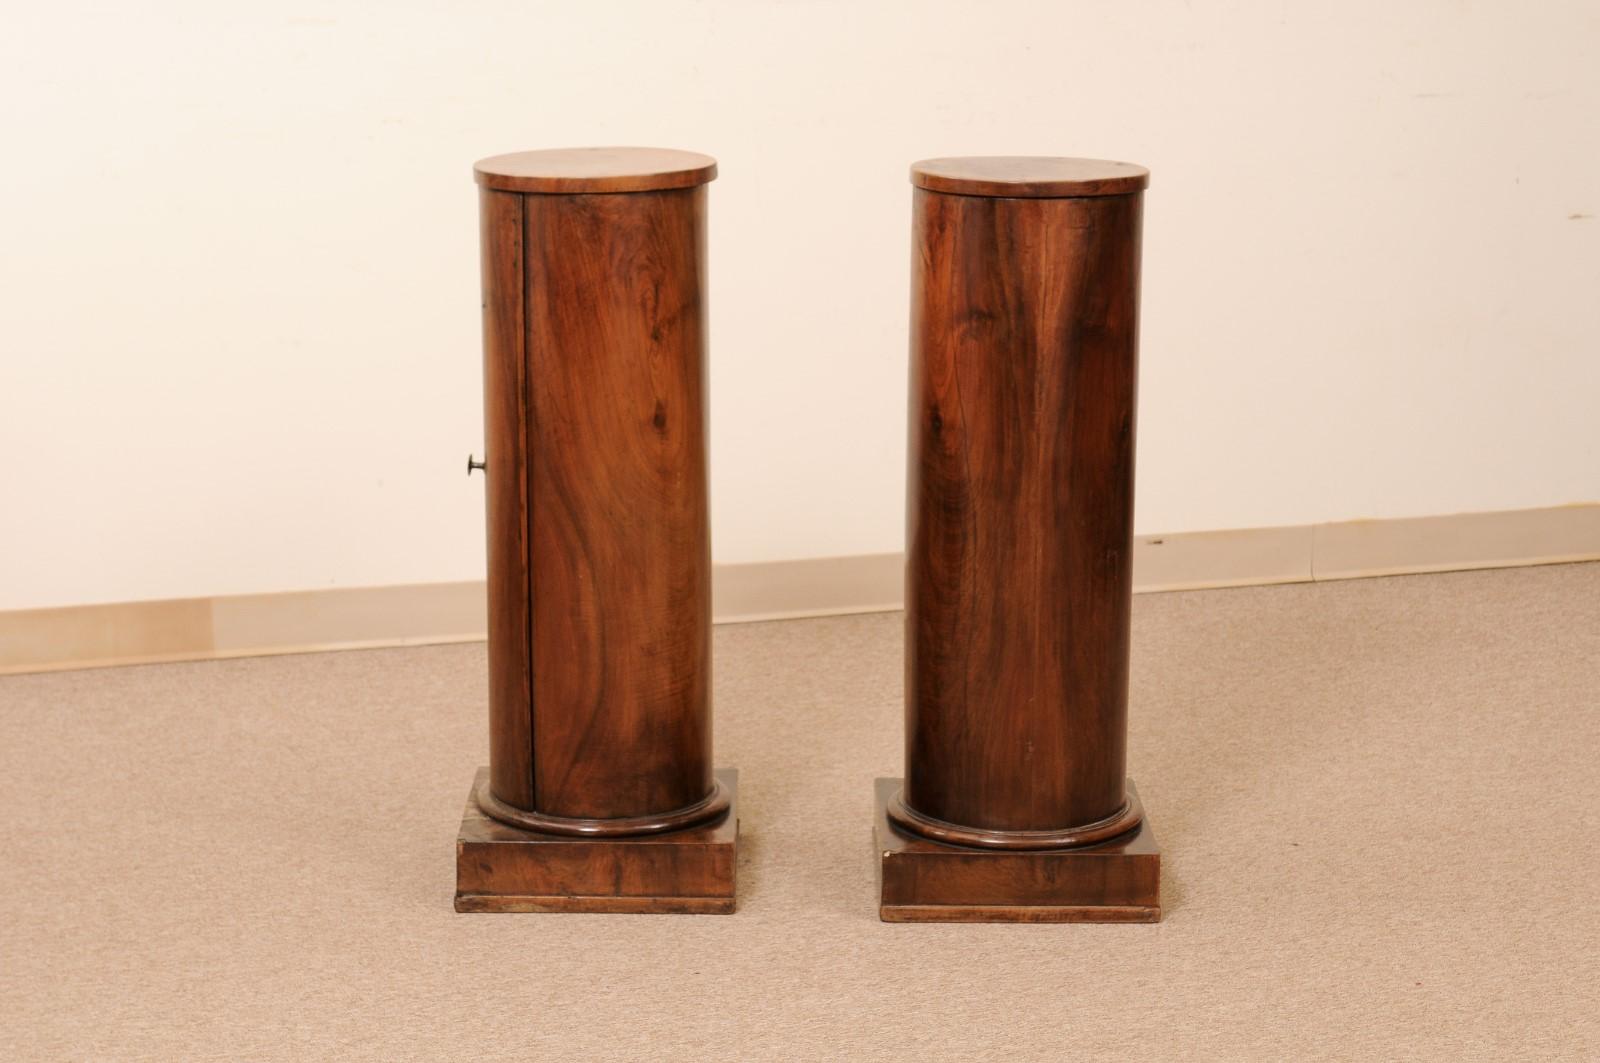 Pair of Early 19th Century Italian Neoclassical Walnut Pedestal Cabinets For Sale 7